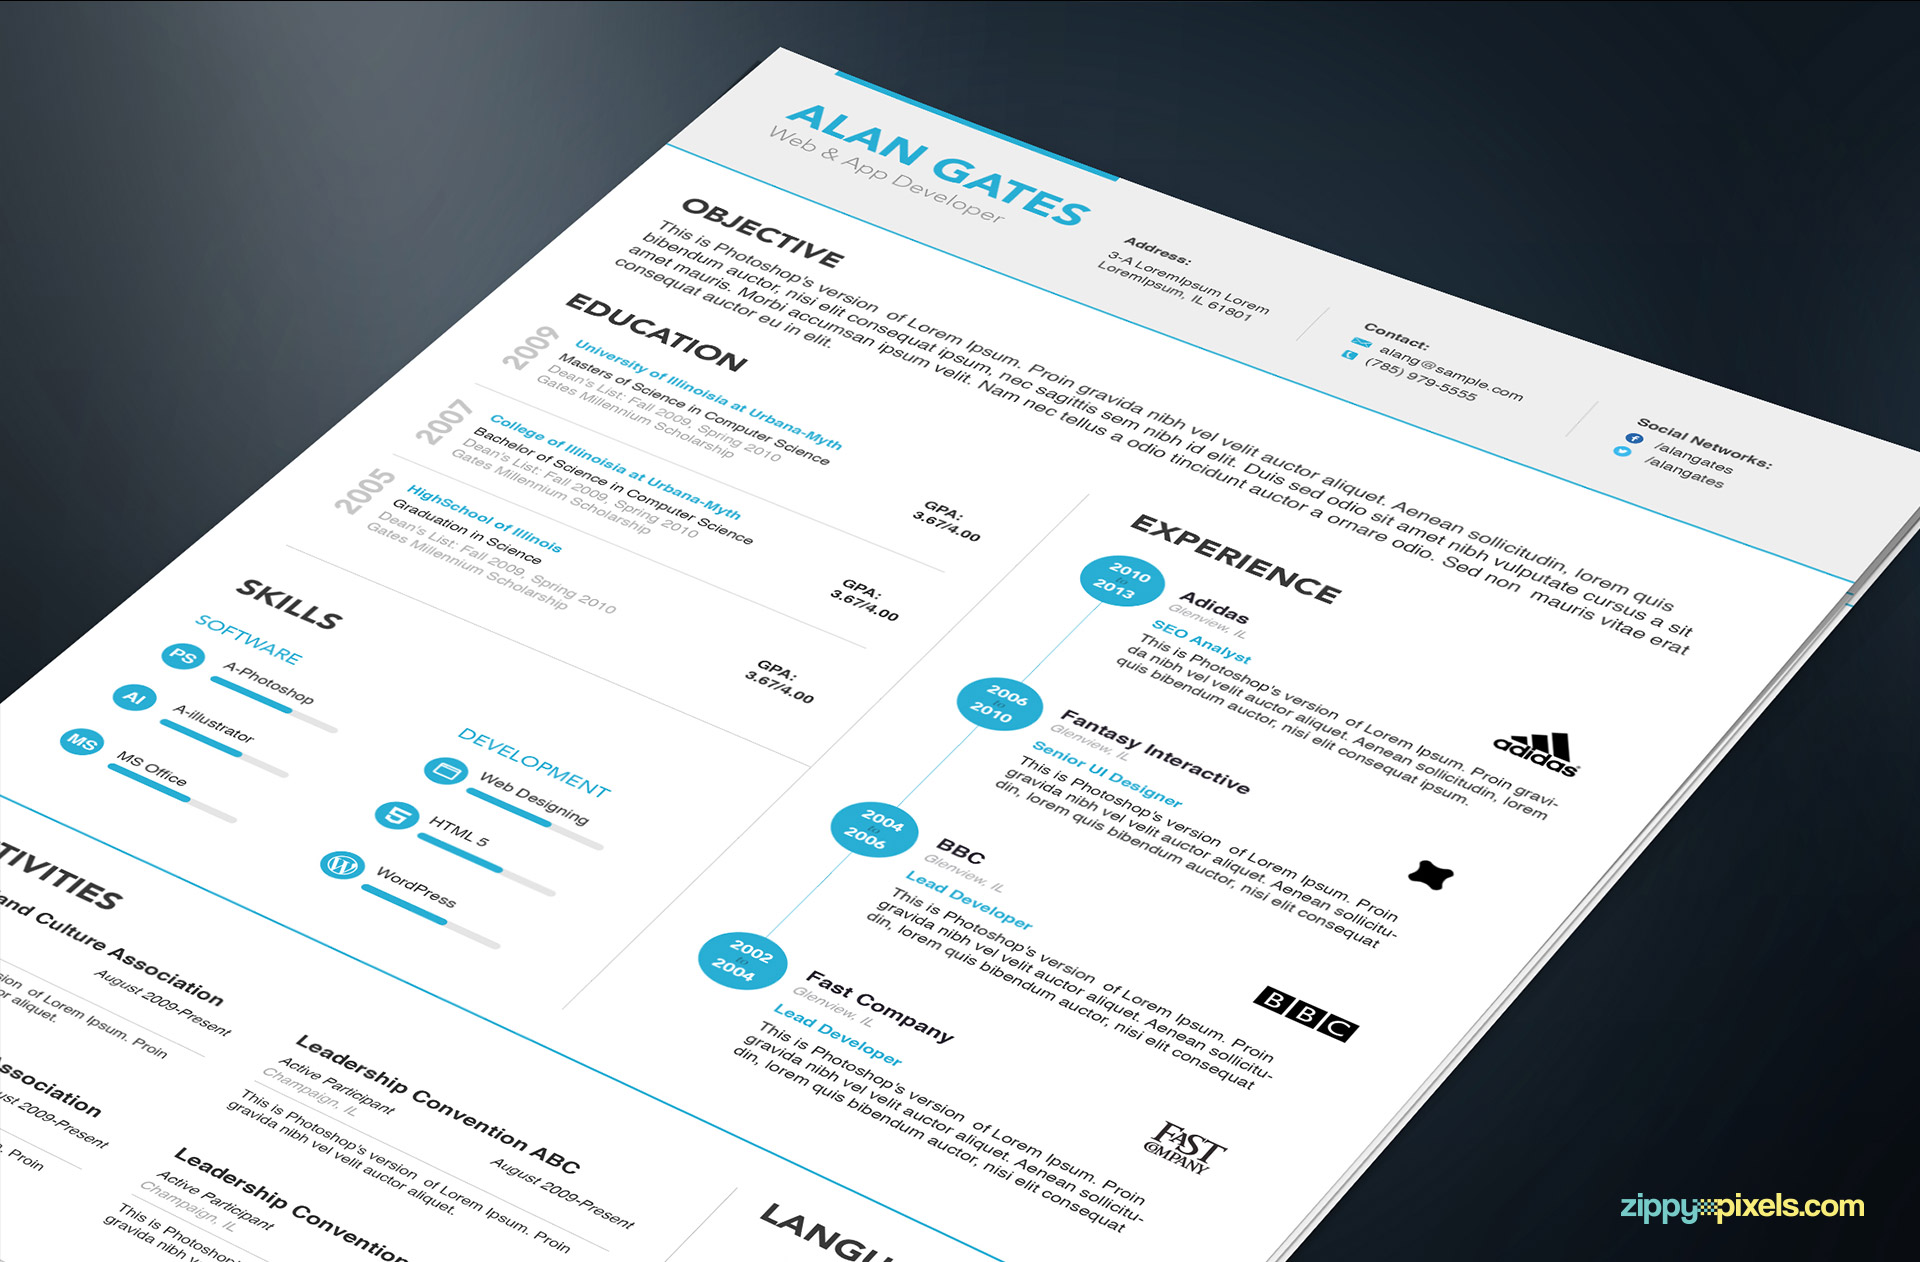 Professional Resume & Cover Letter Template â€“ MS Word & PSD Formats